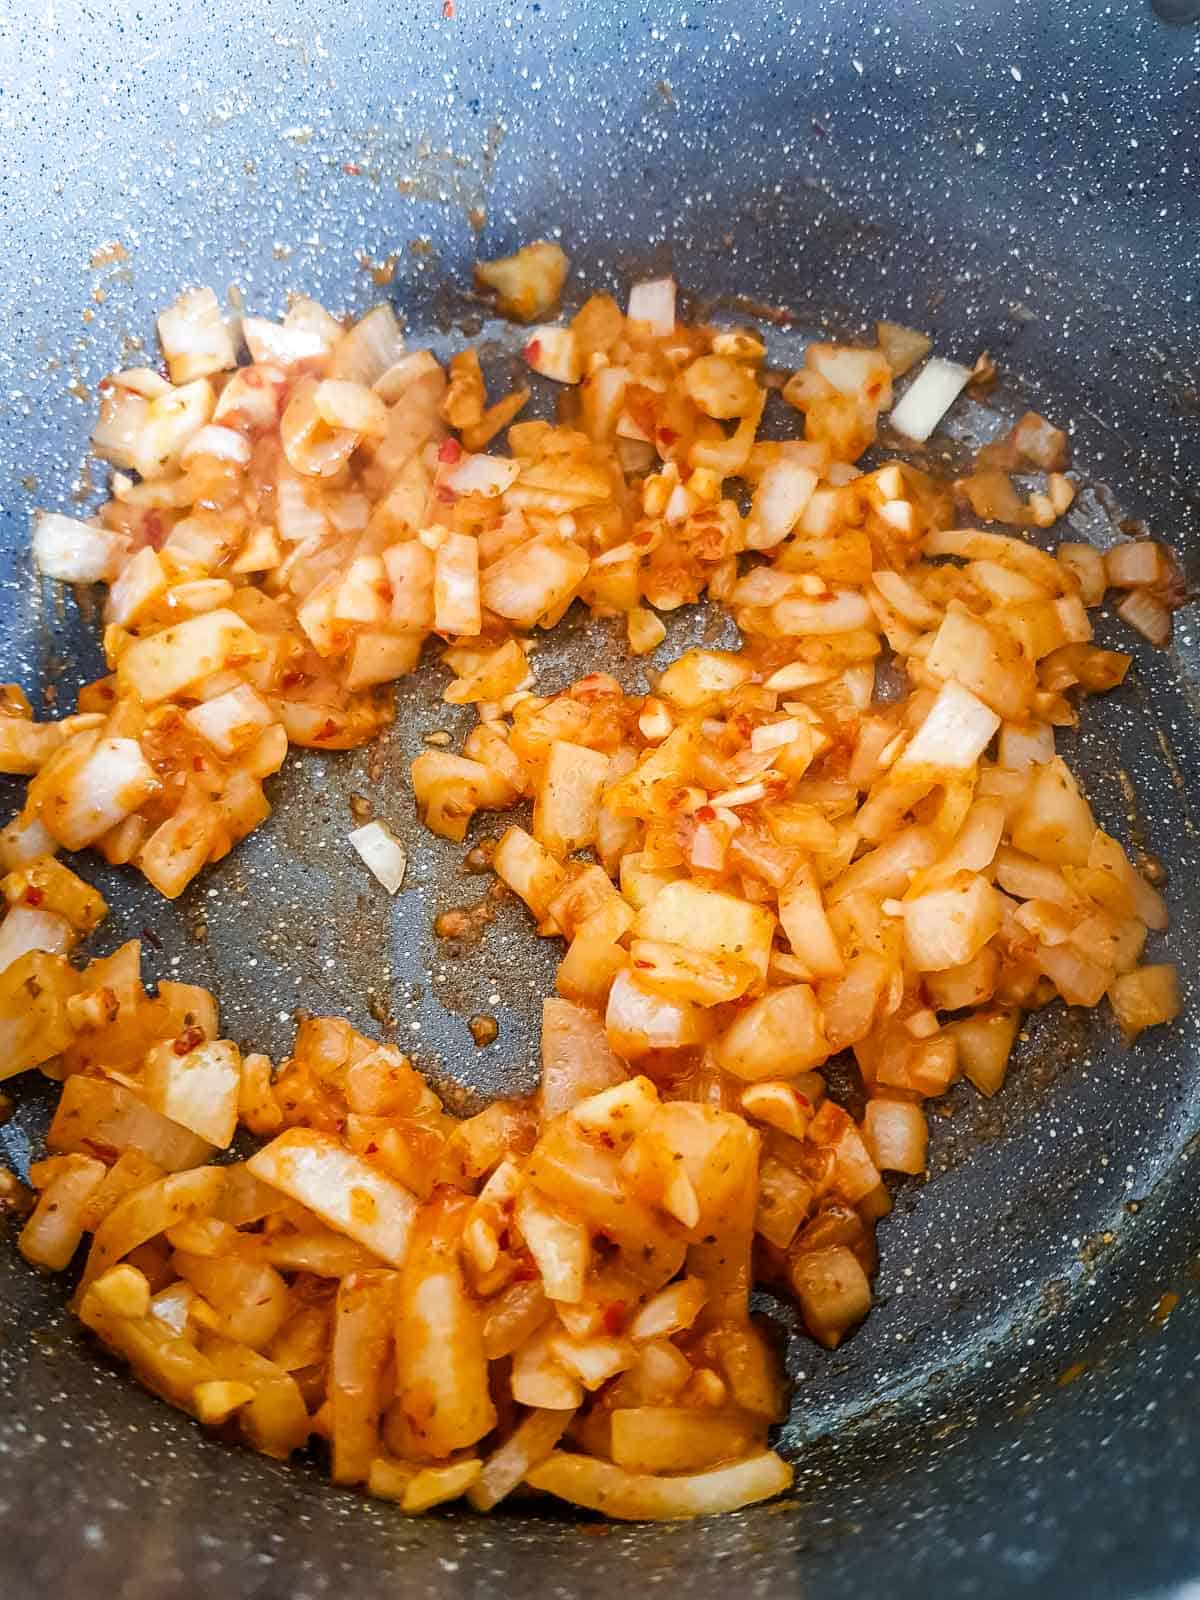 Onions, garlic and curry paste in a pot.